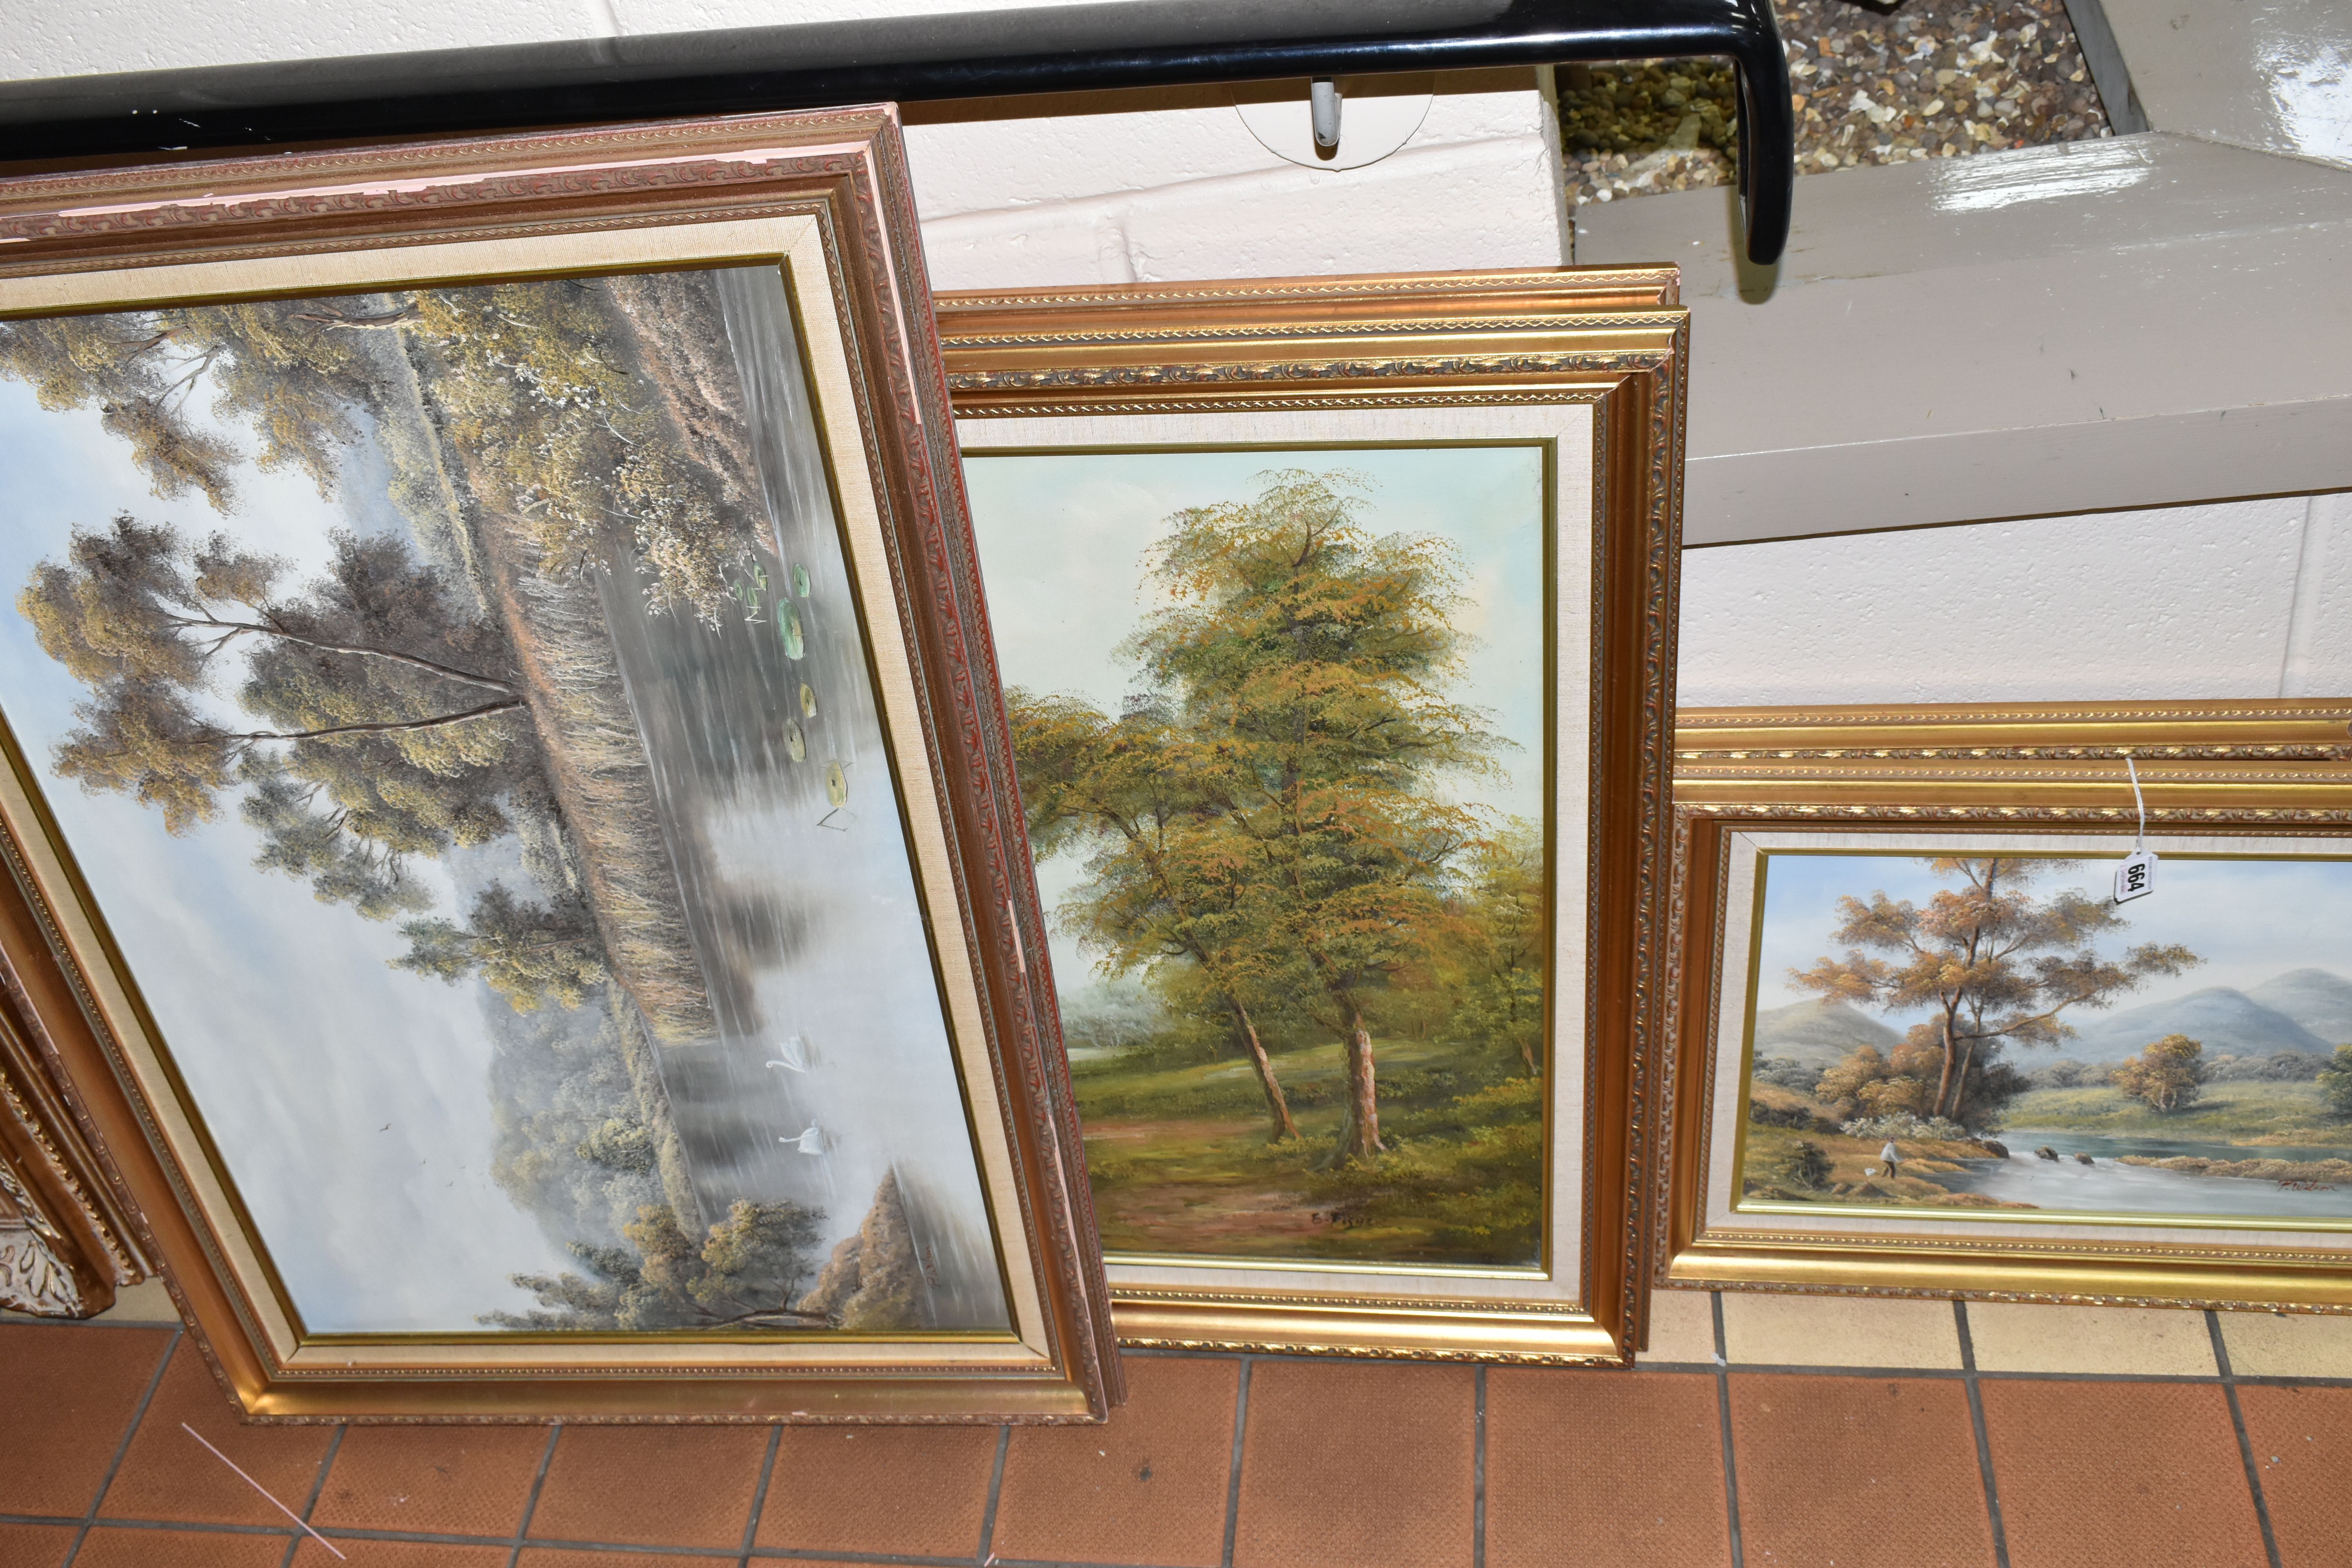 FIVE LATE 20TH CENTURY LANDSCAPE PAINTINGS, comprising four signed P. Wilson, largest